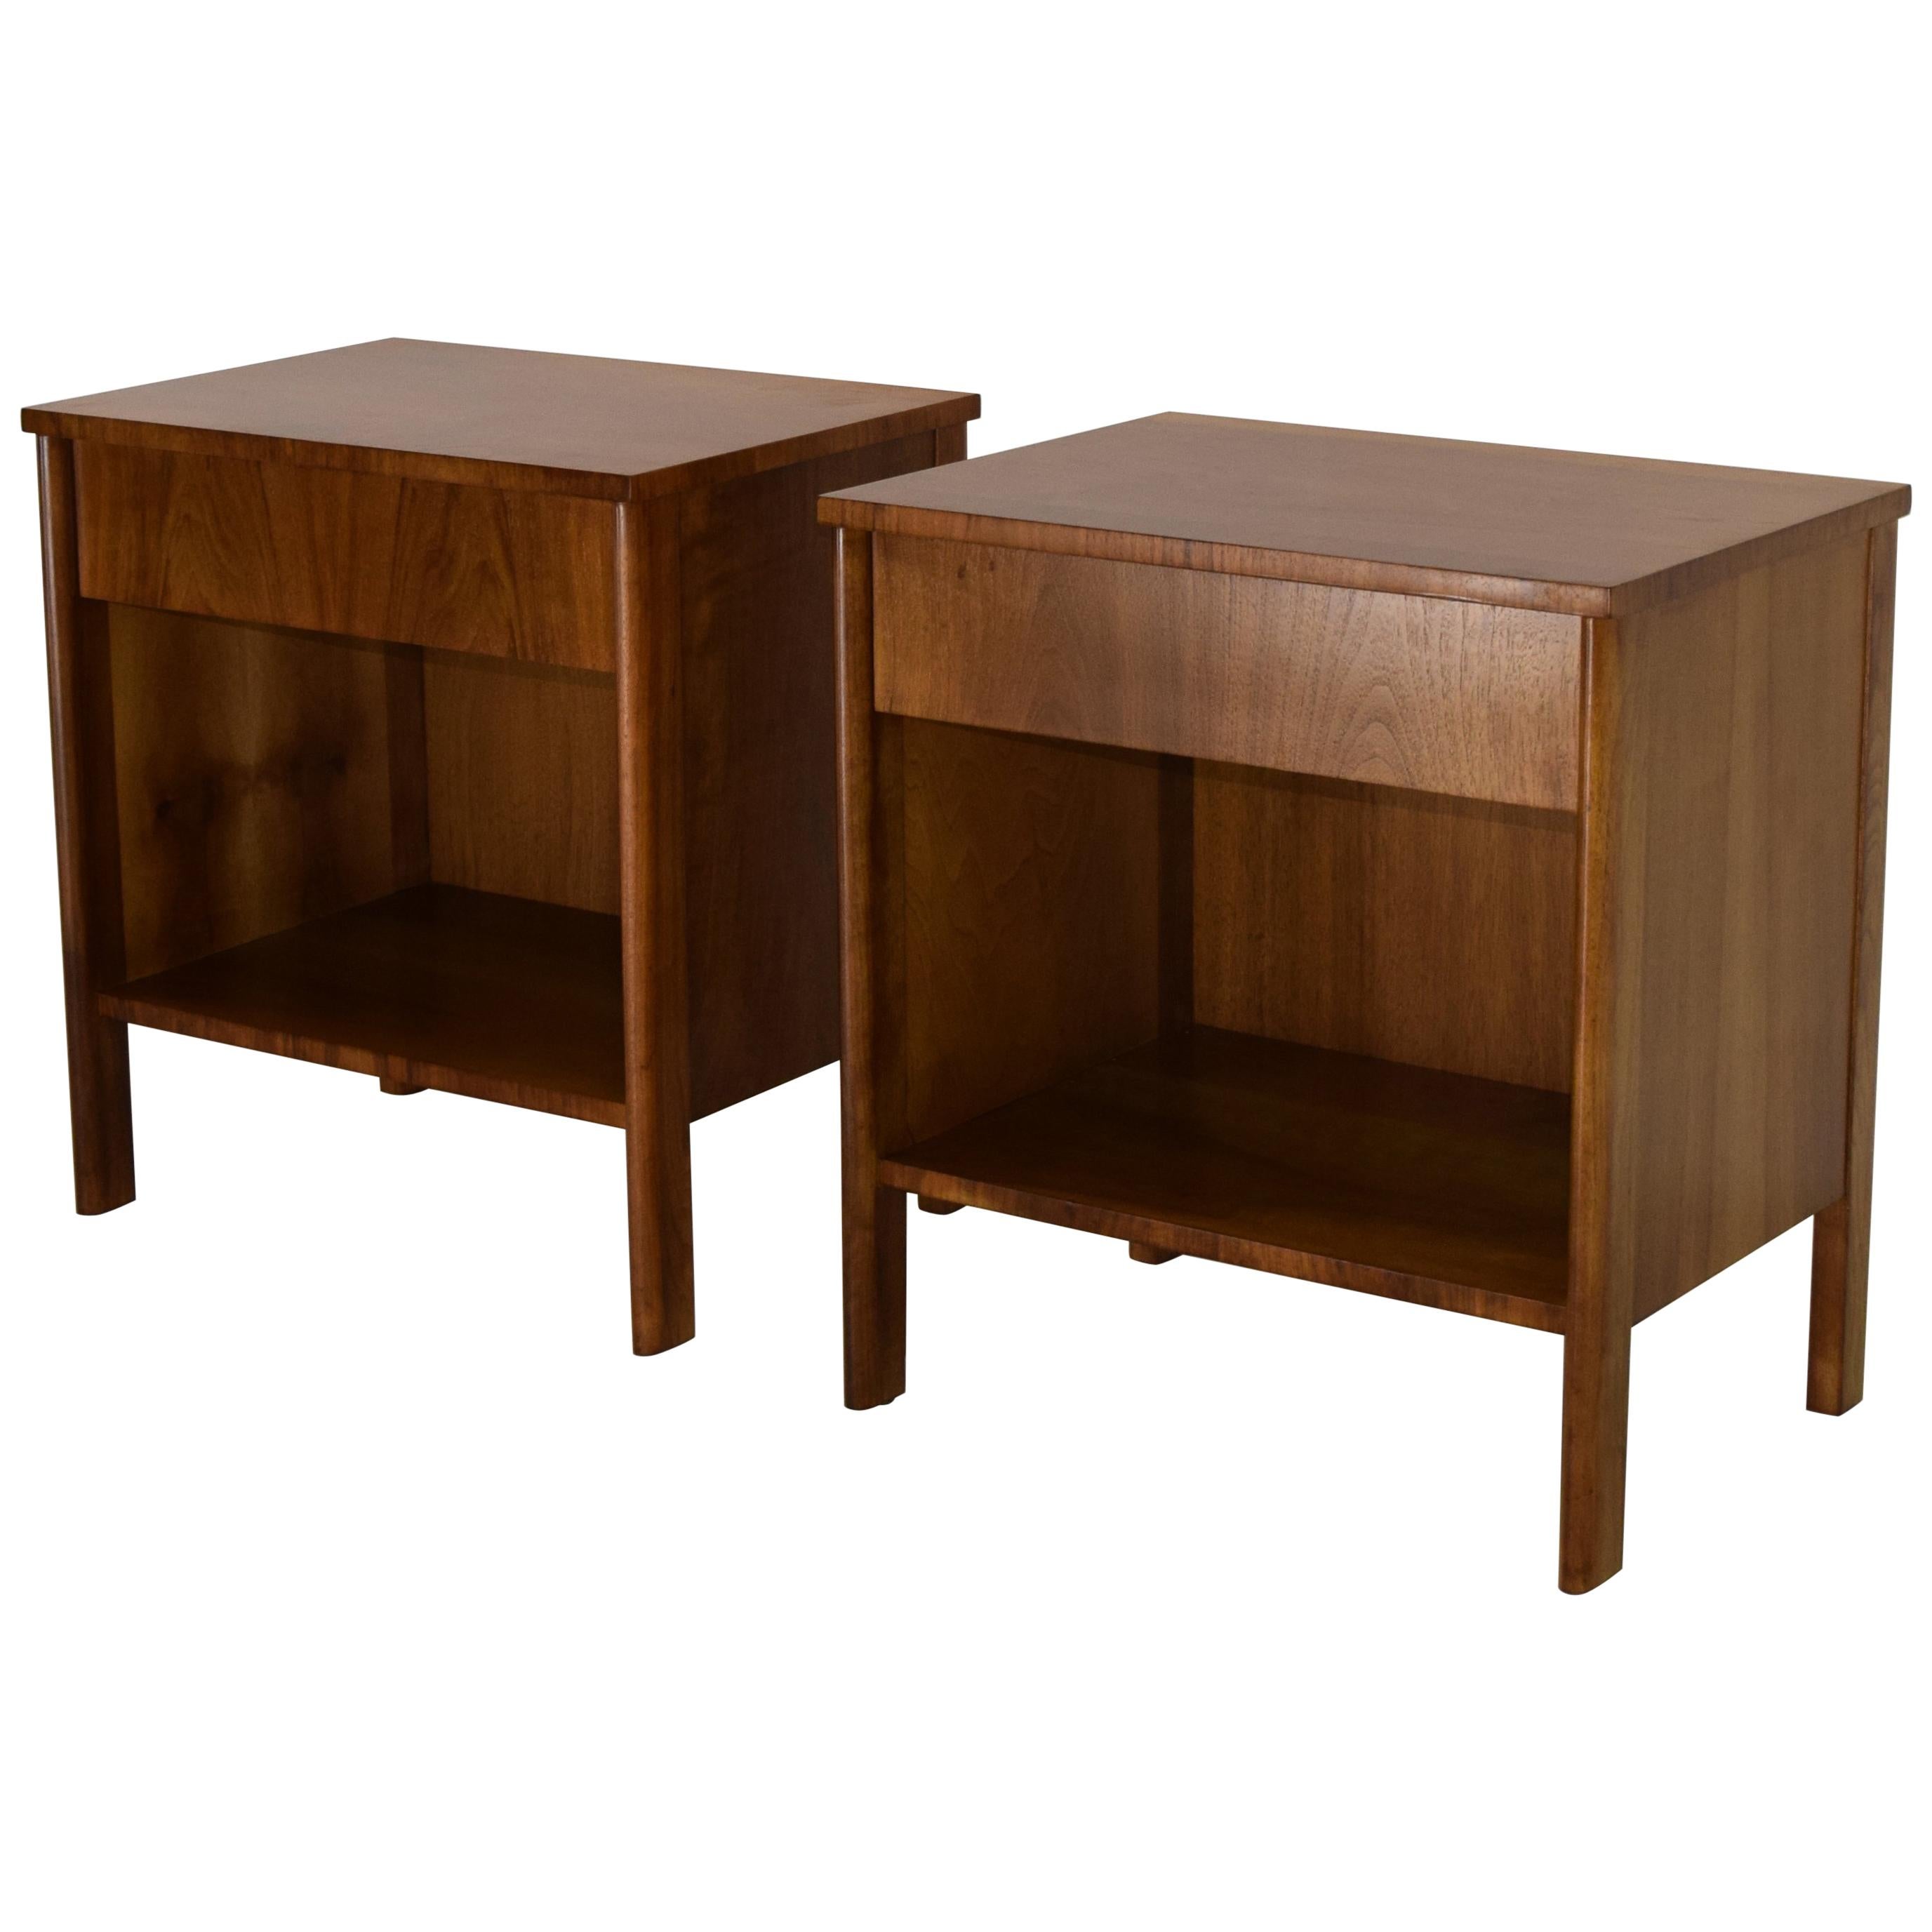 Nightstands by Dale Ford for John Widdicomb in Walnut